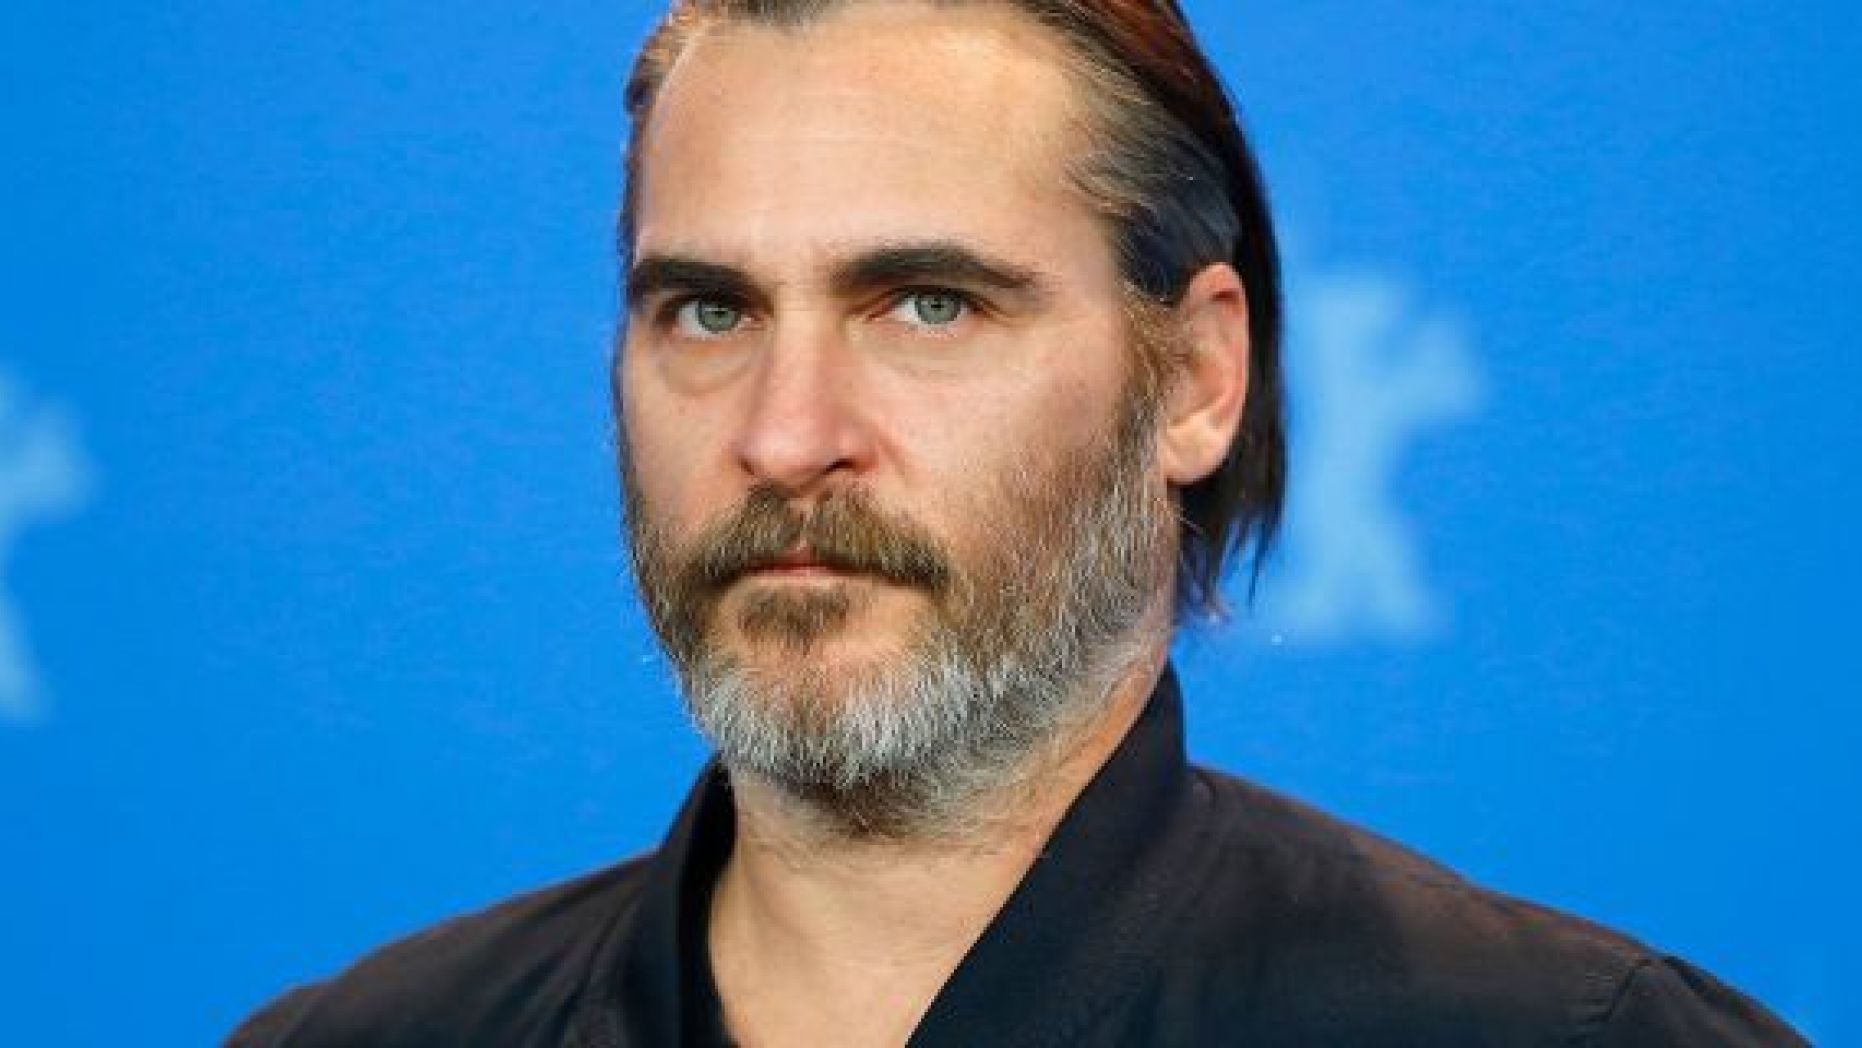 Joaquin Phoenix is set to star as Jesus in the new film "Mary Magdalene," but he refused to do one of the miracles.